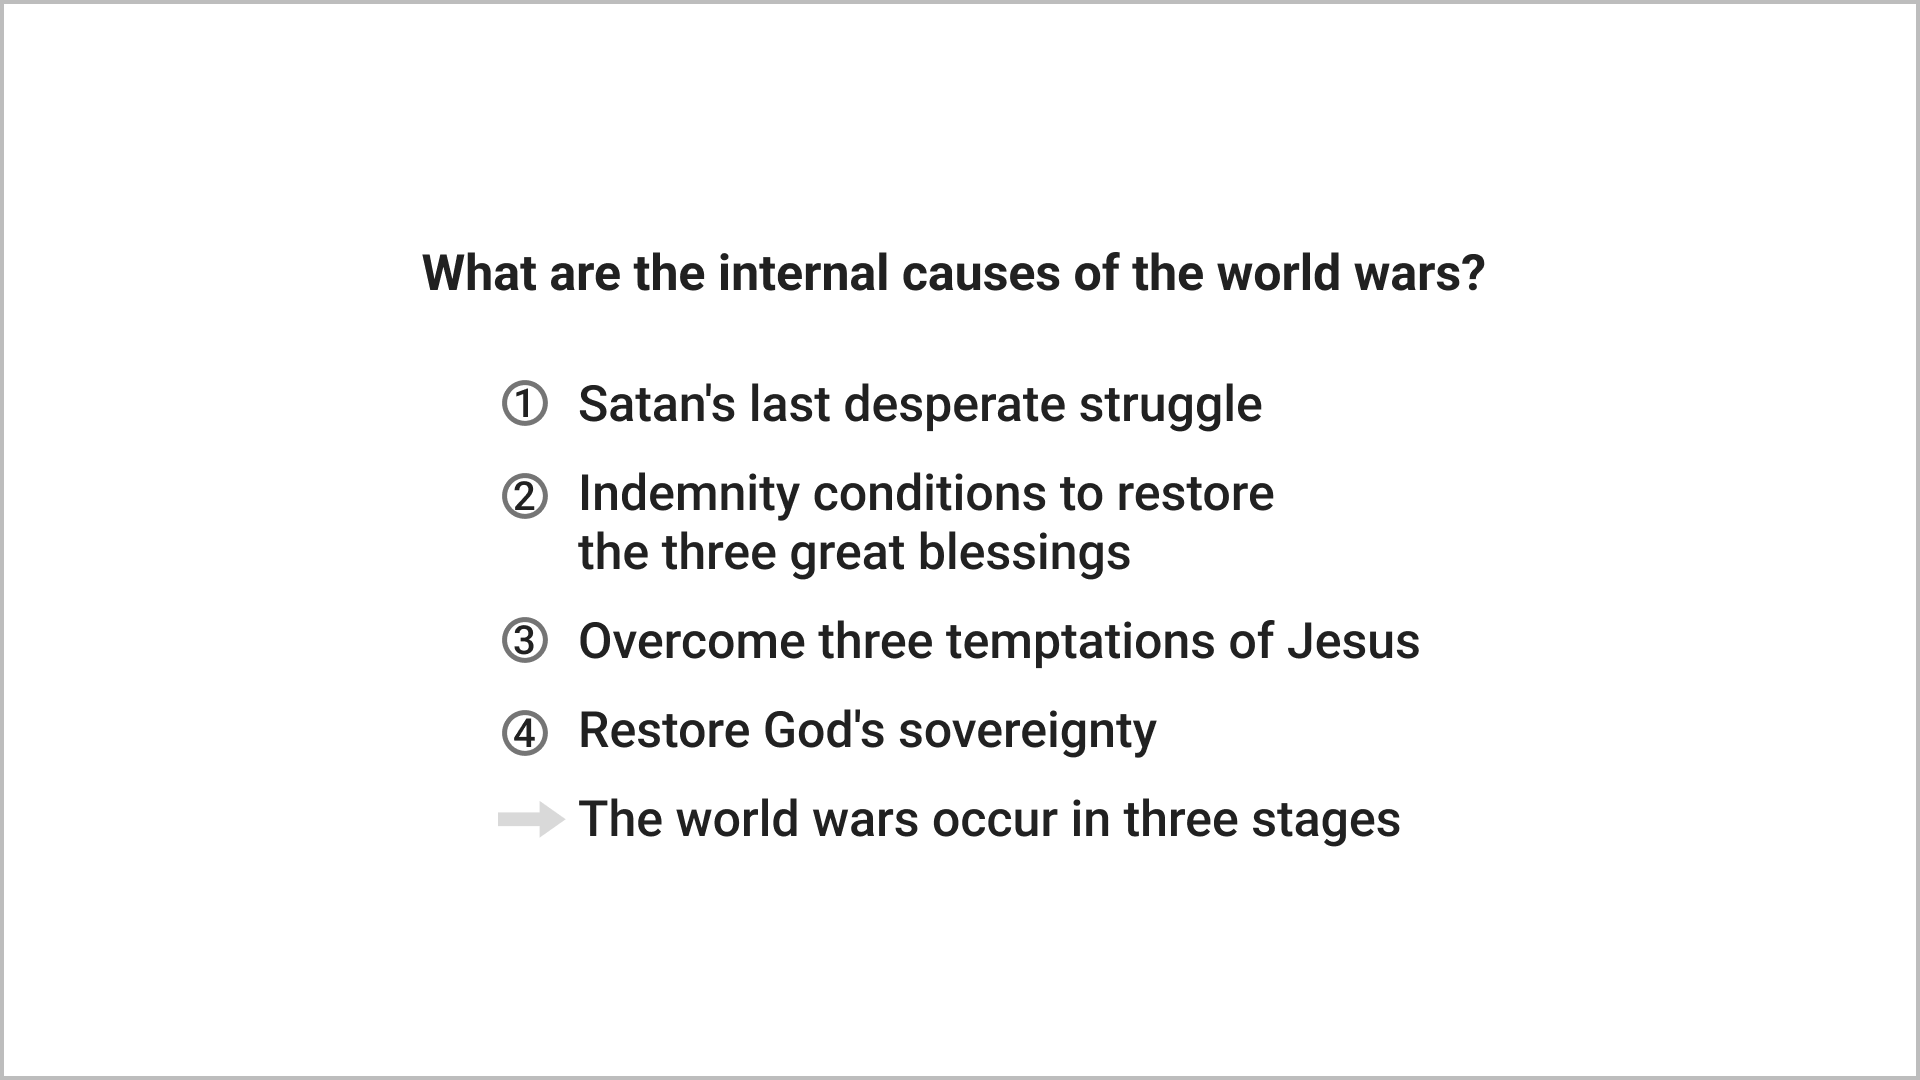 What are the internal causes of the world wars?